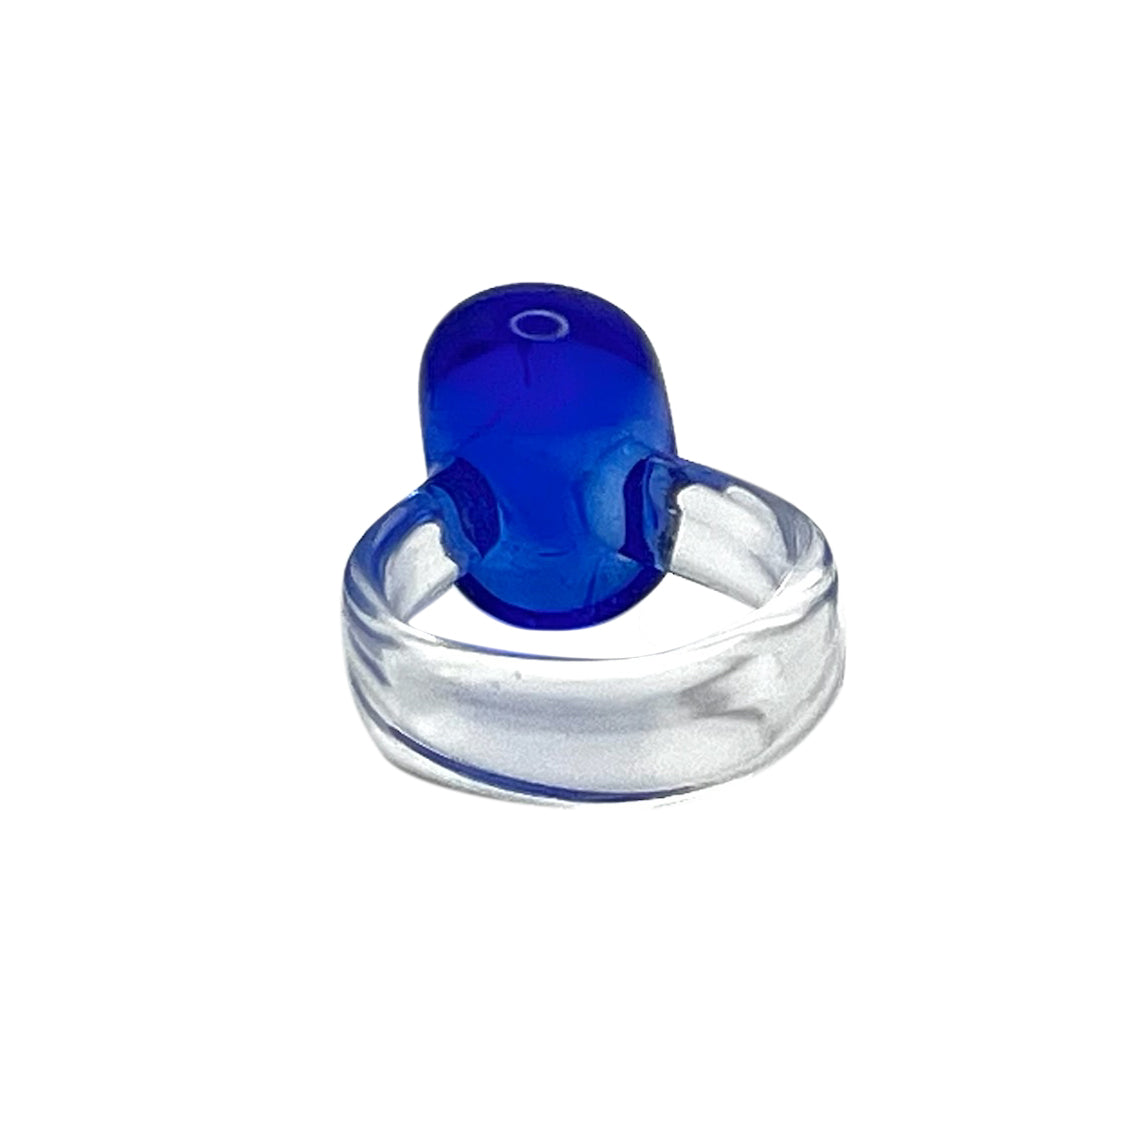 Blueberry Jelly Bean Ring